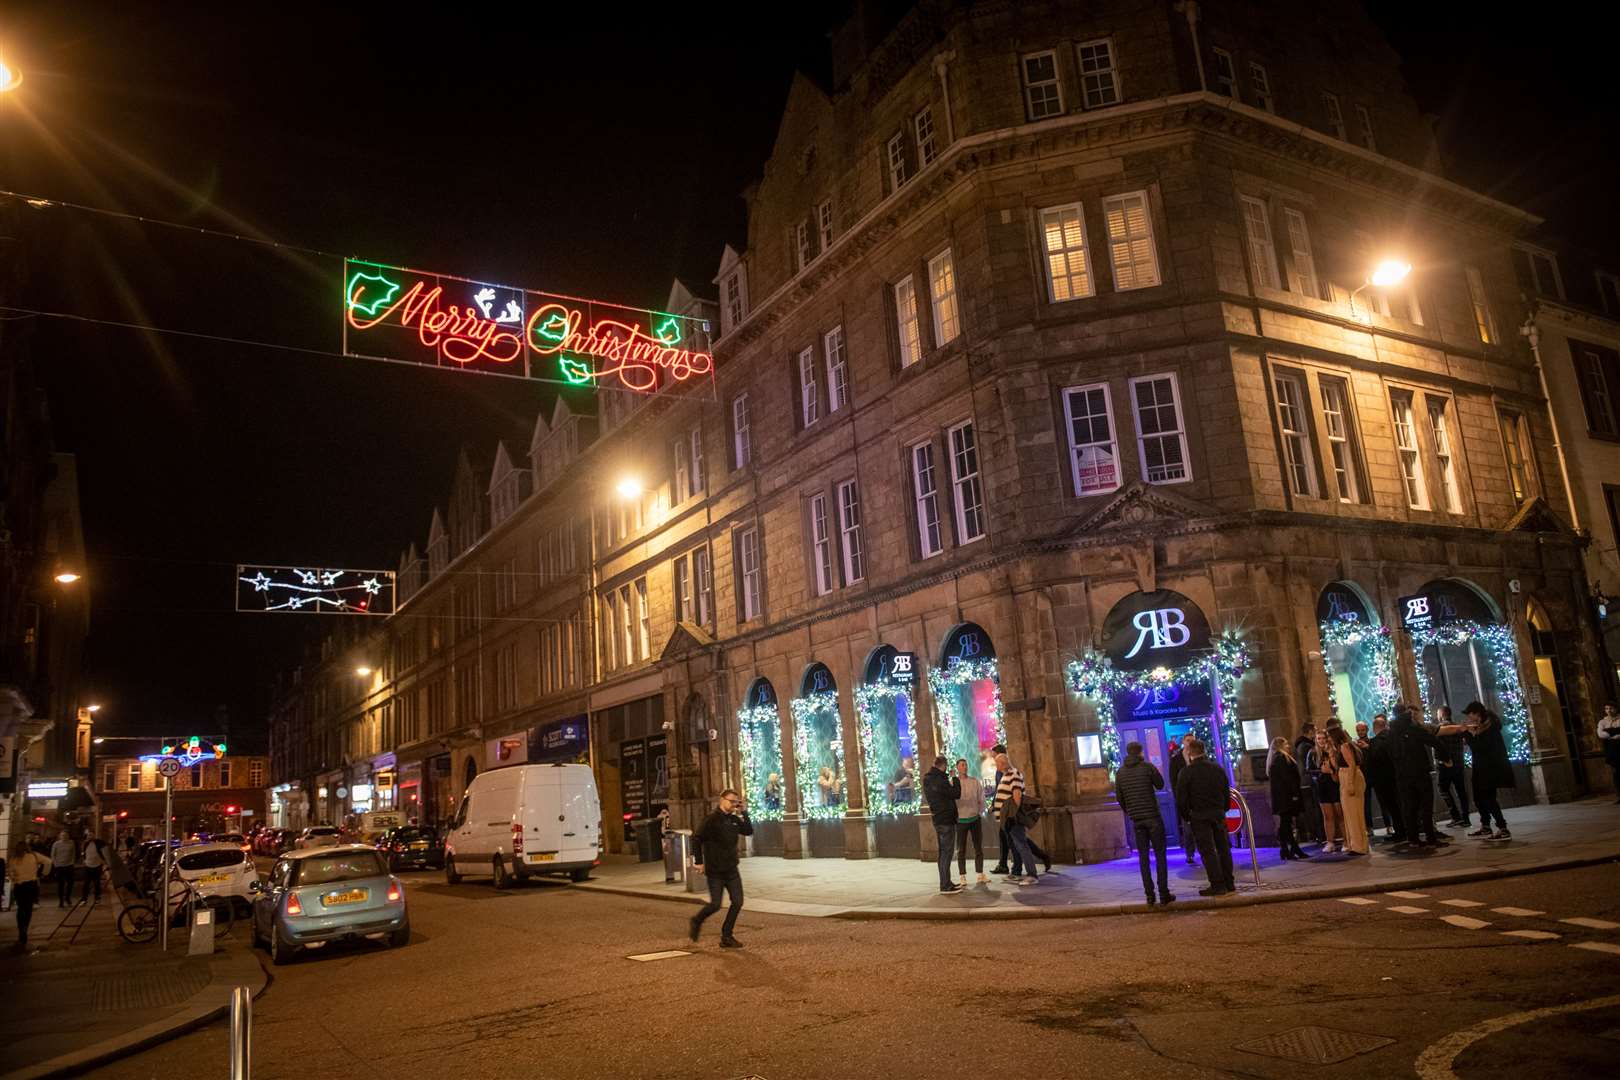 Will people flock to the city centre for festive celebration or save money by staying at home?